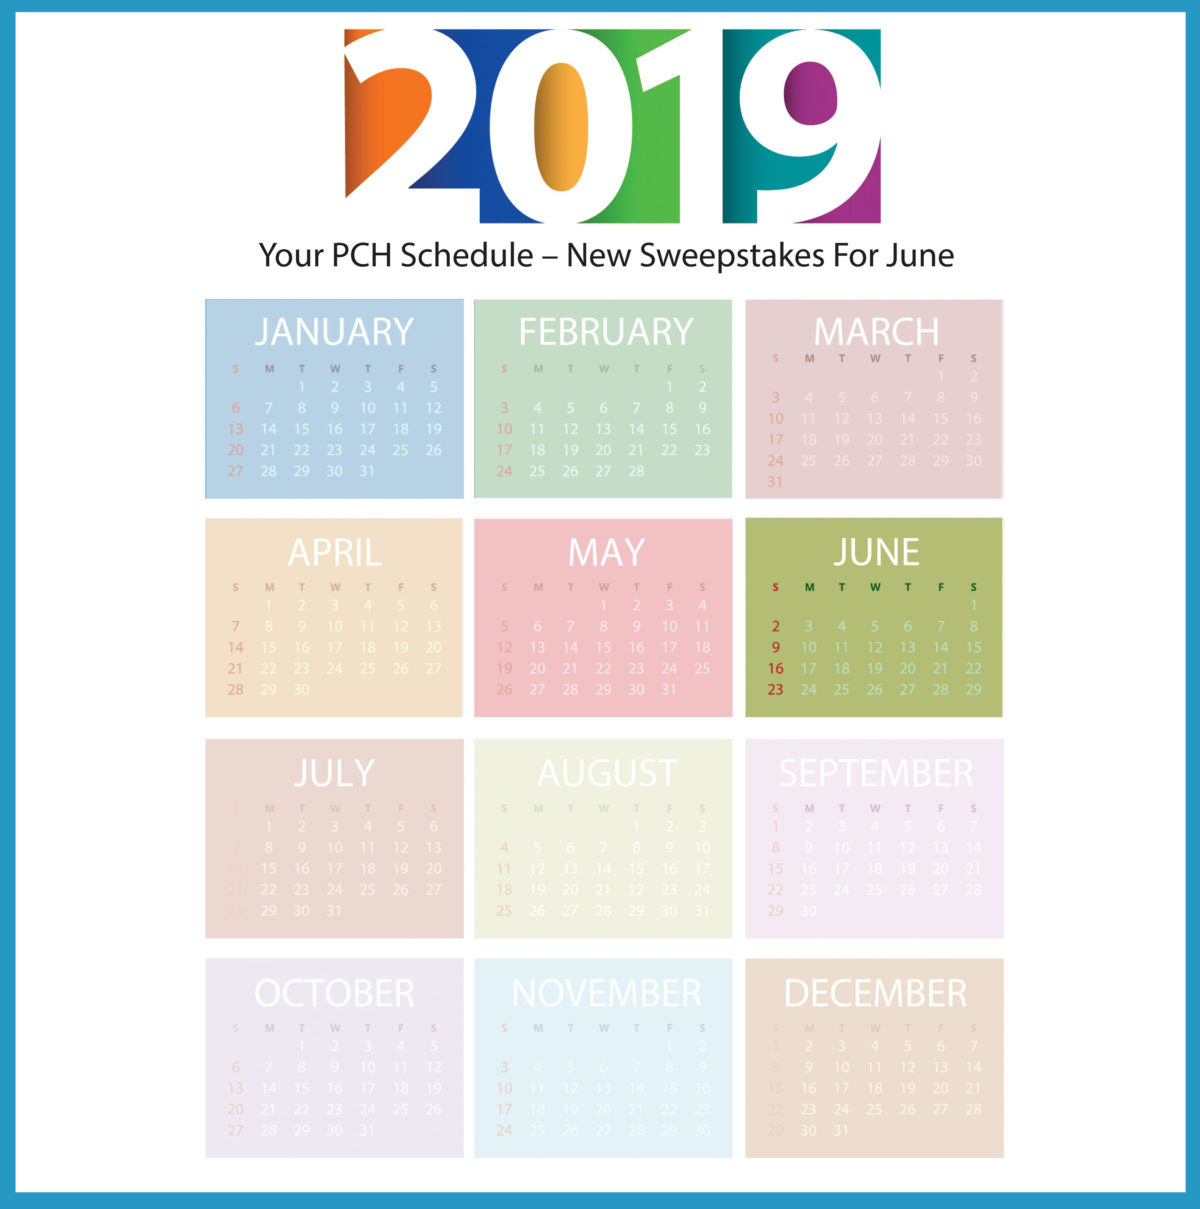 Your PCH Schedule – New Sweepstakes for June